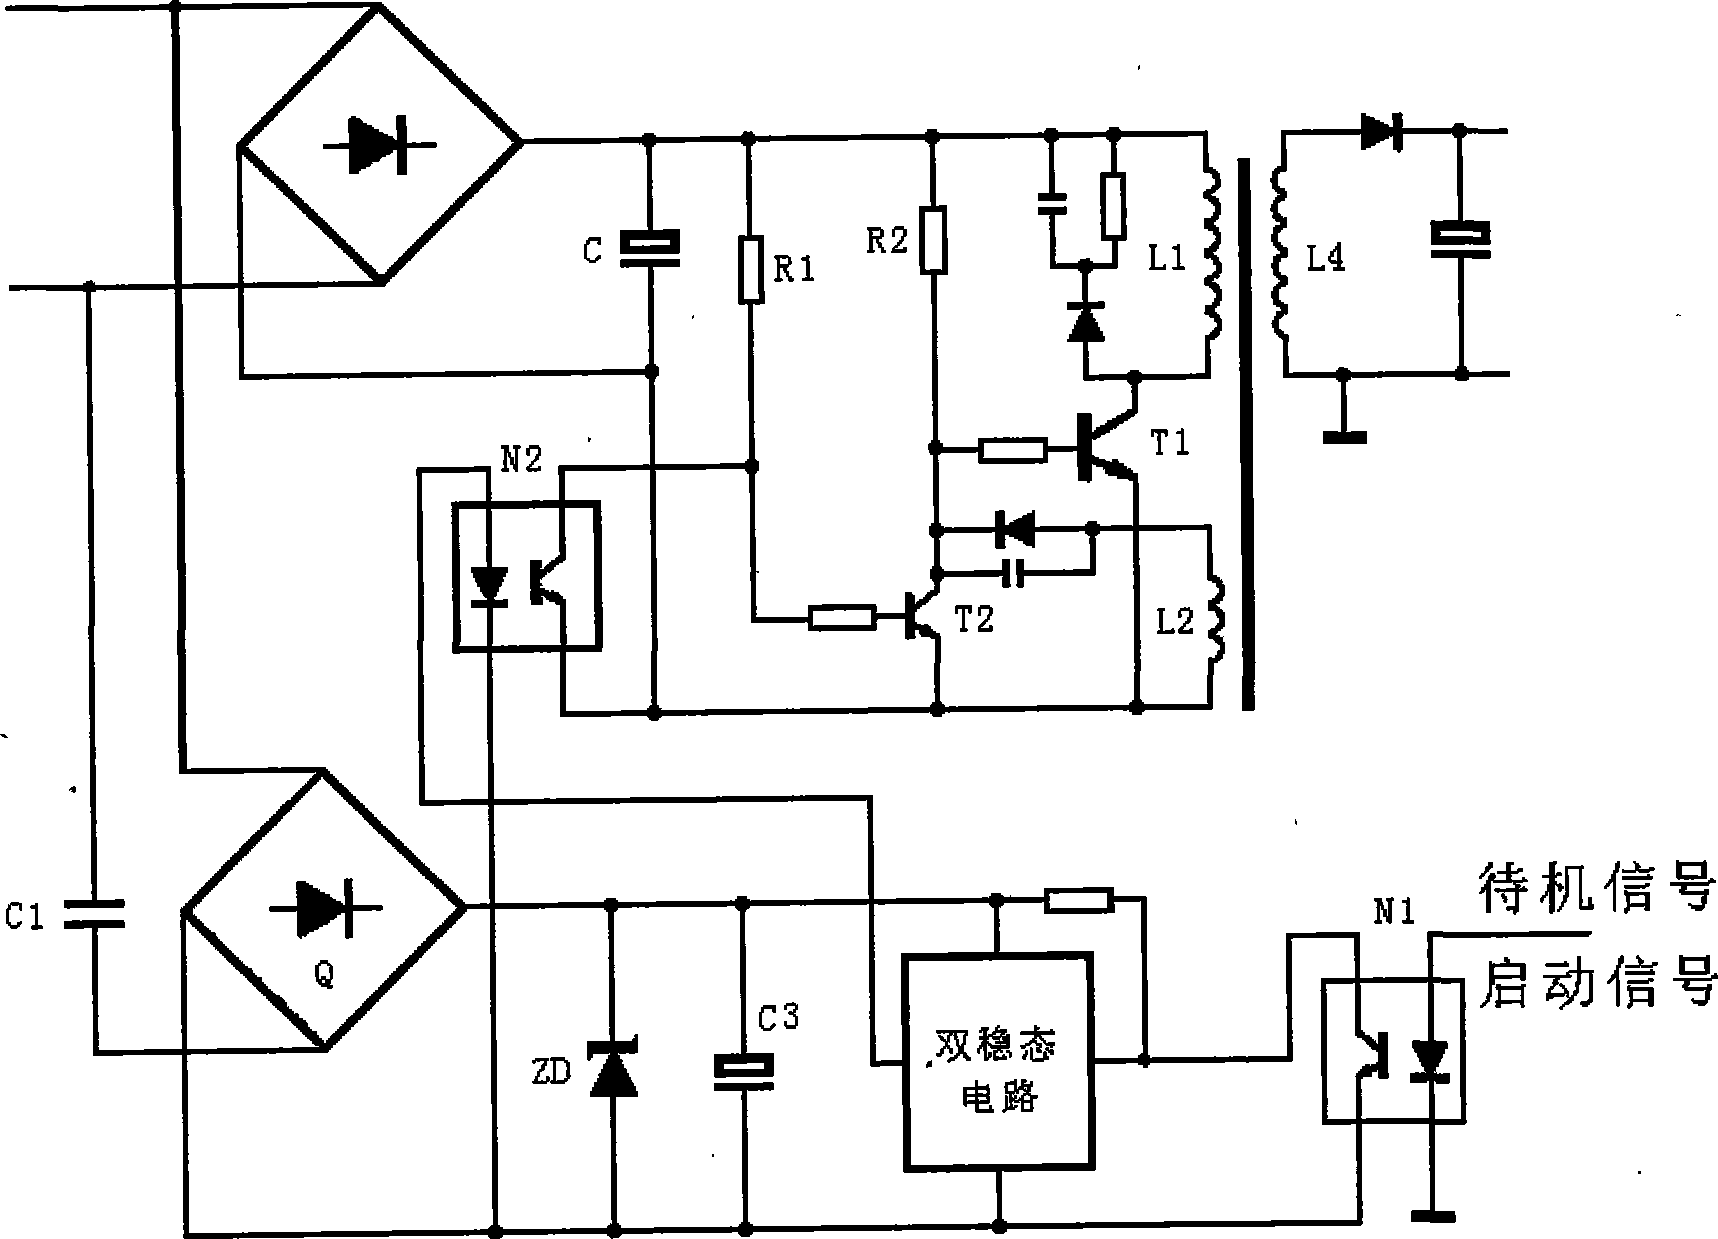 Capacitive switch power supply with low power consumption standby function